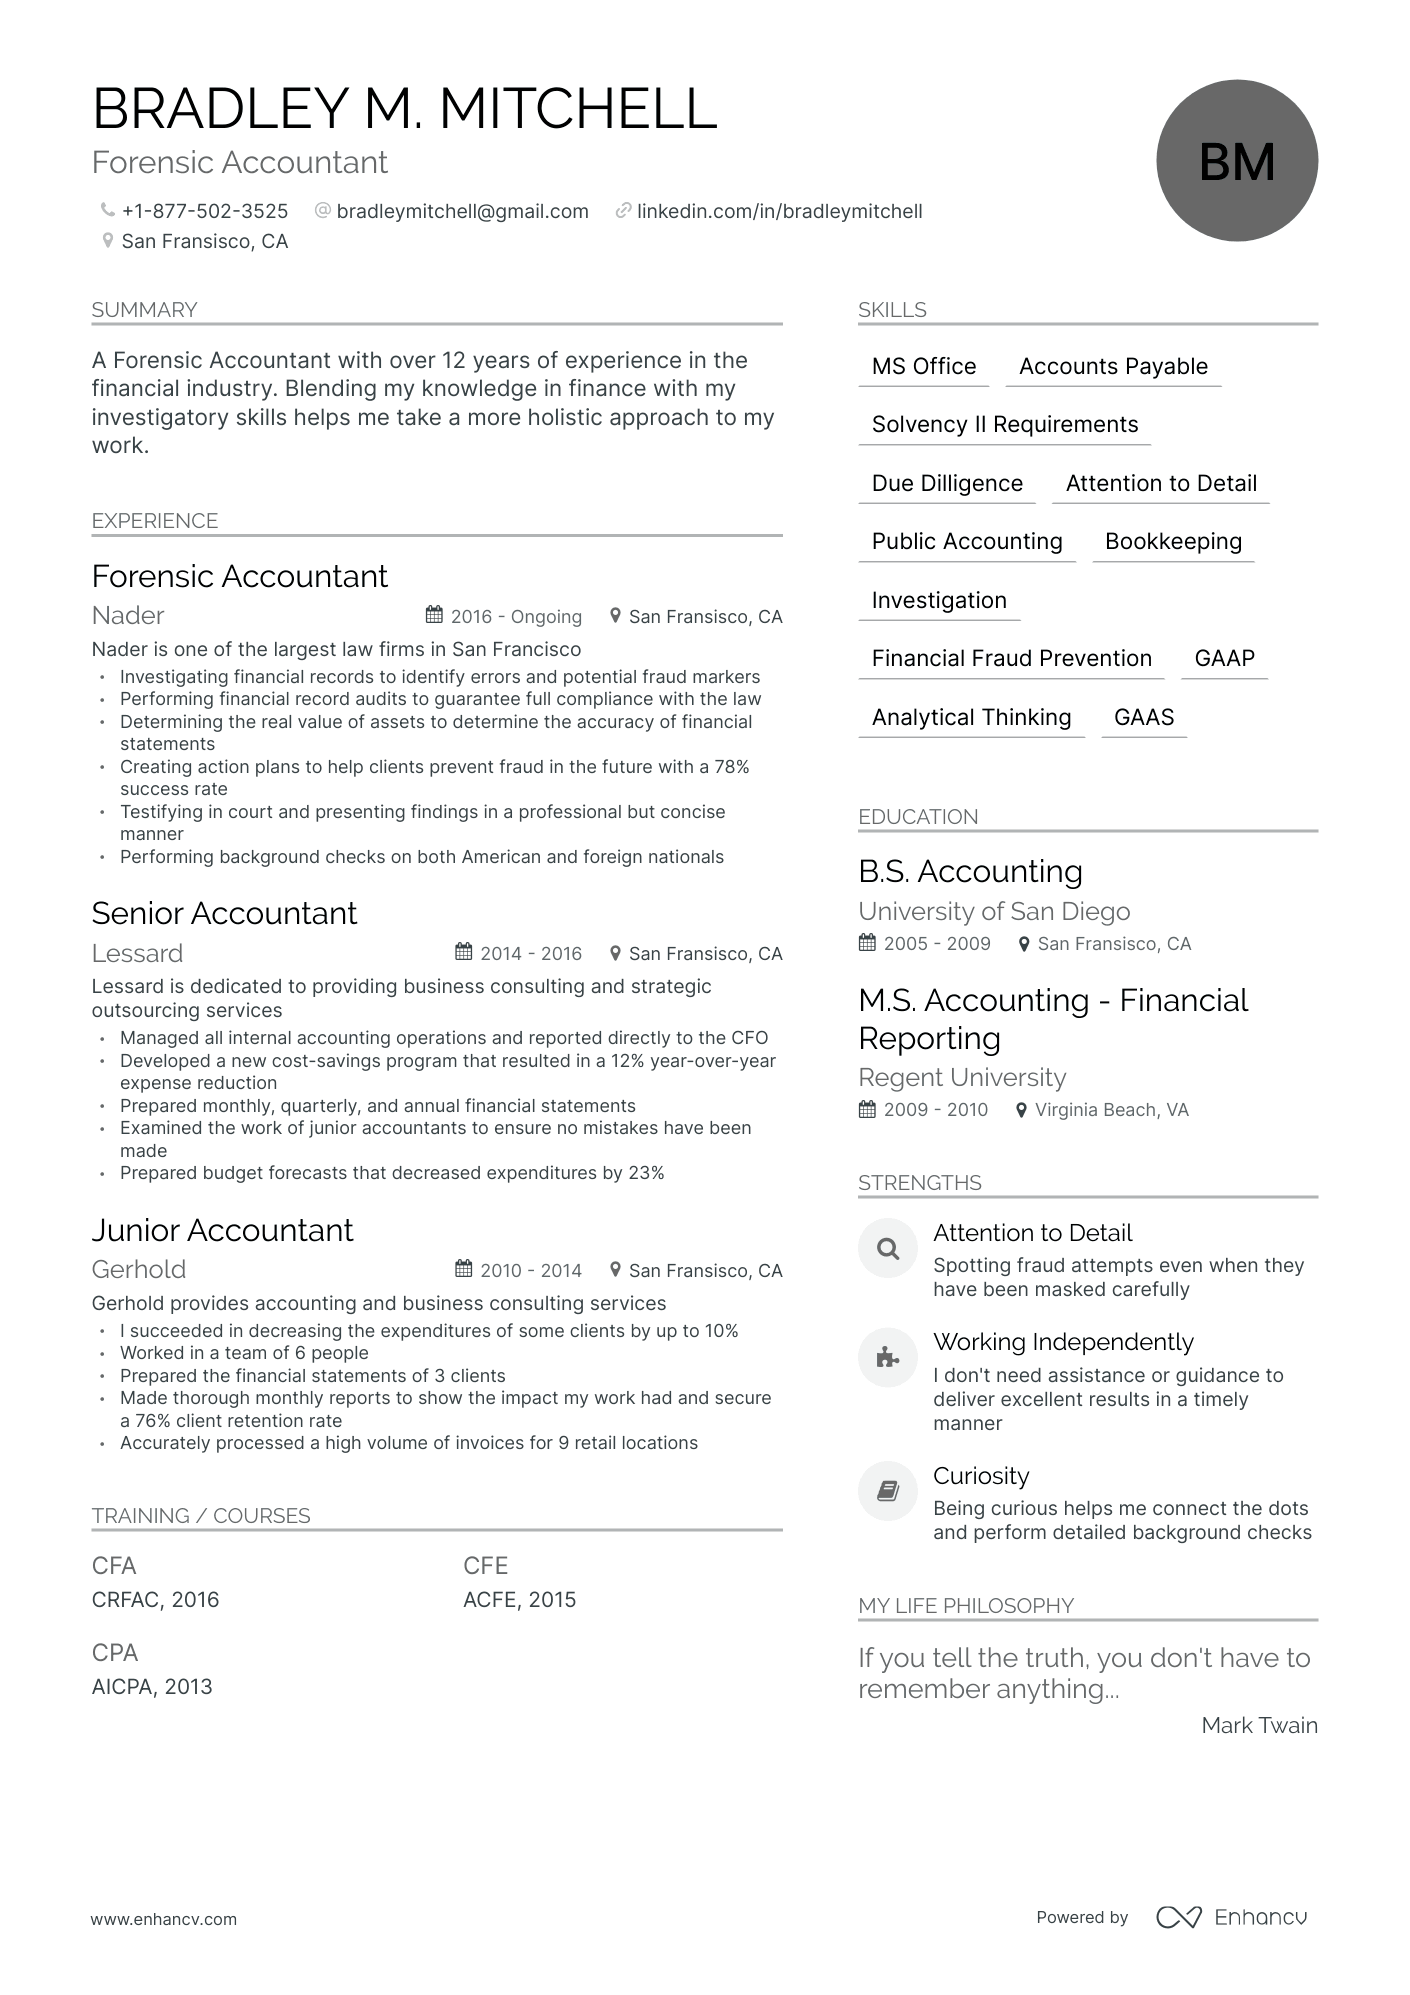 Modern Forensic Accounting Resume Template